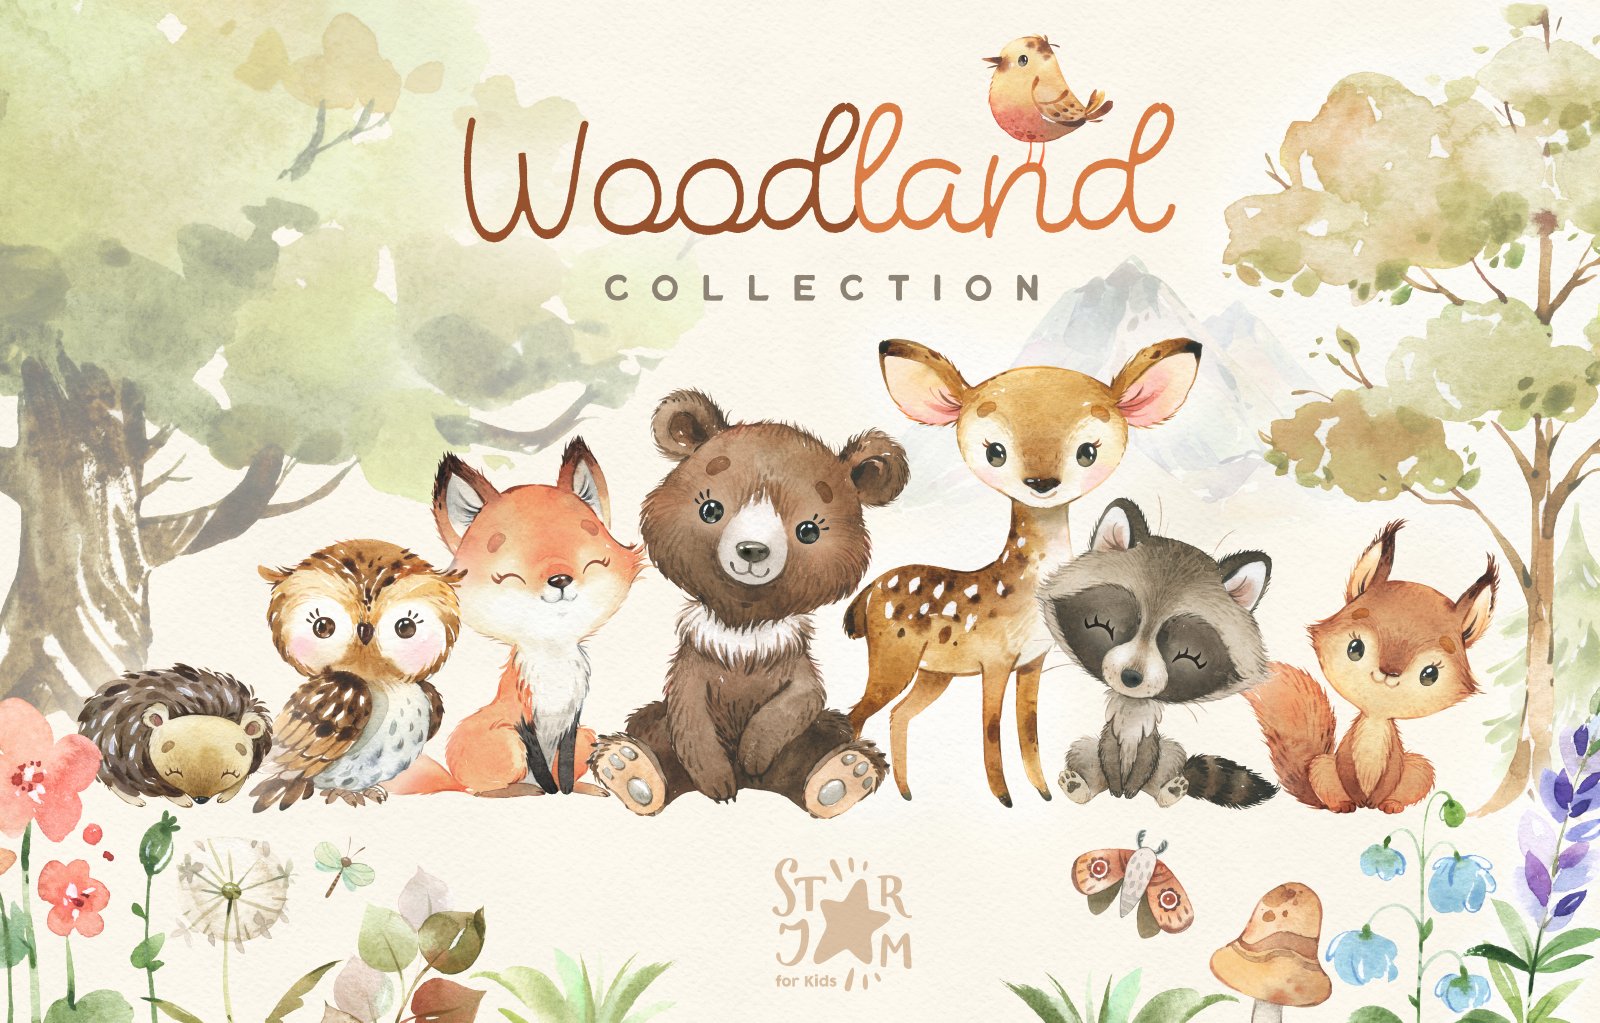 Woodland. Animal Collection cover image.